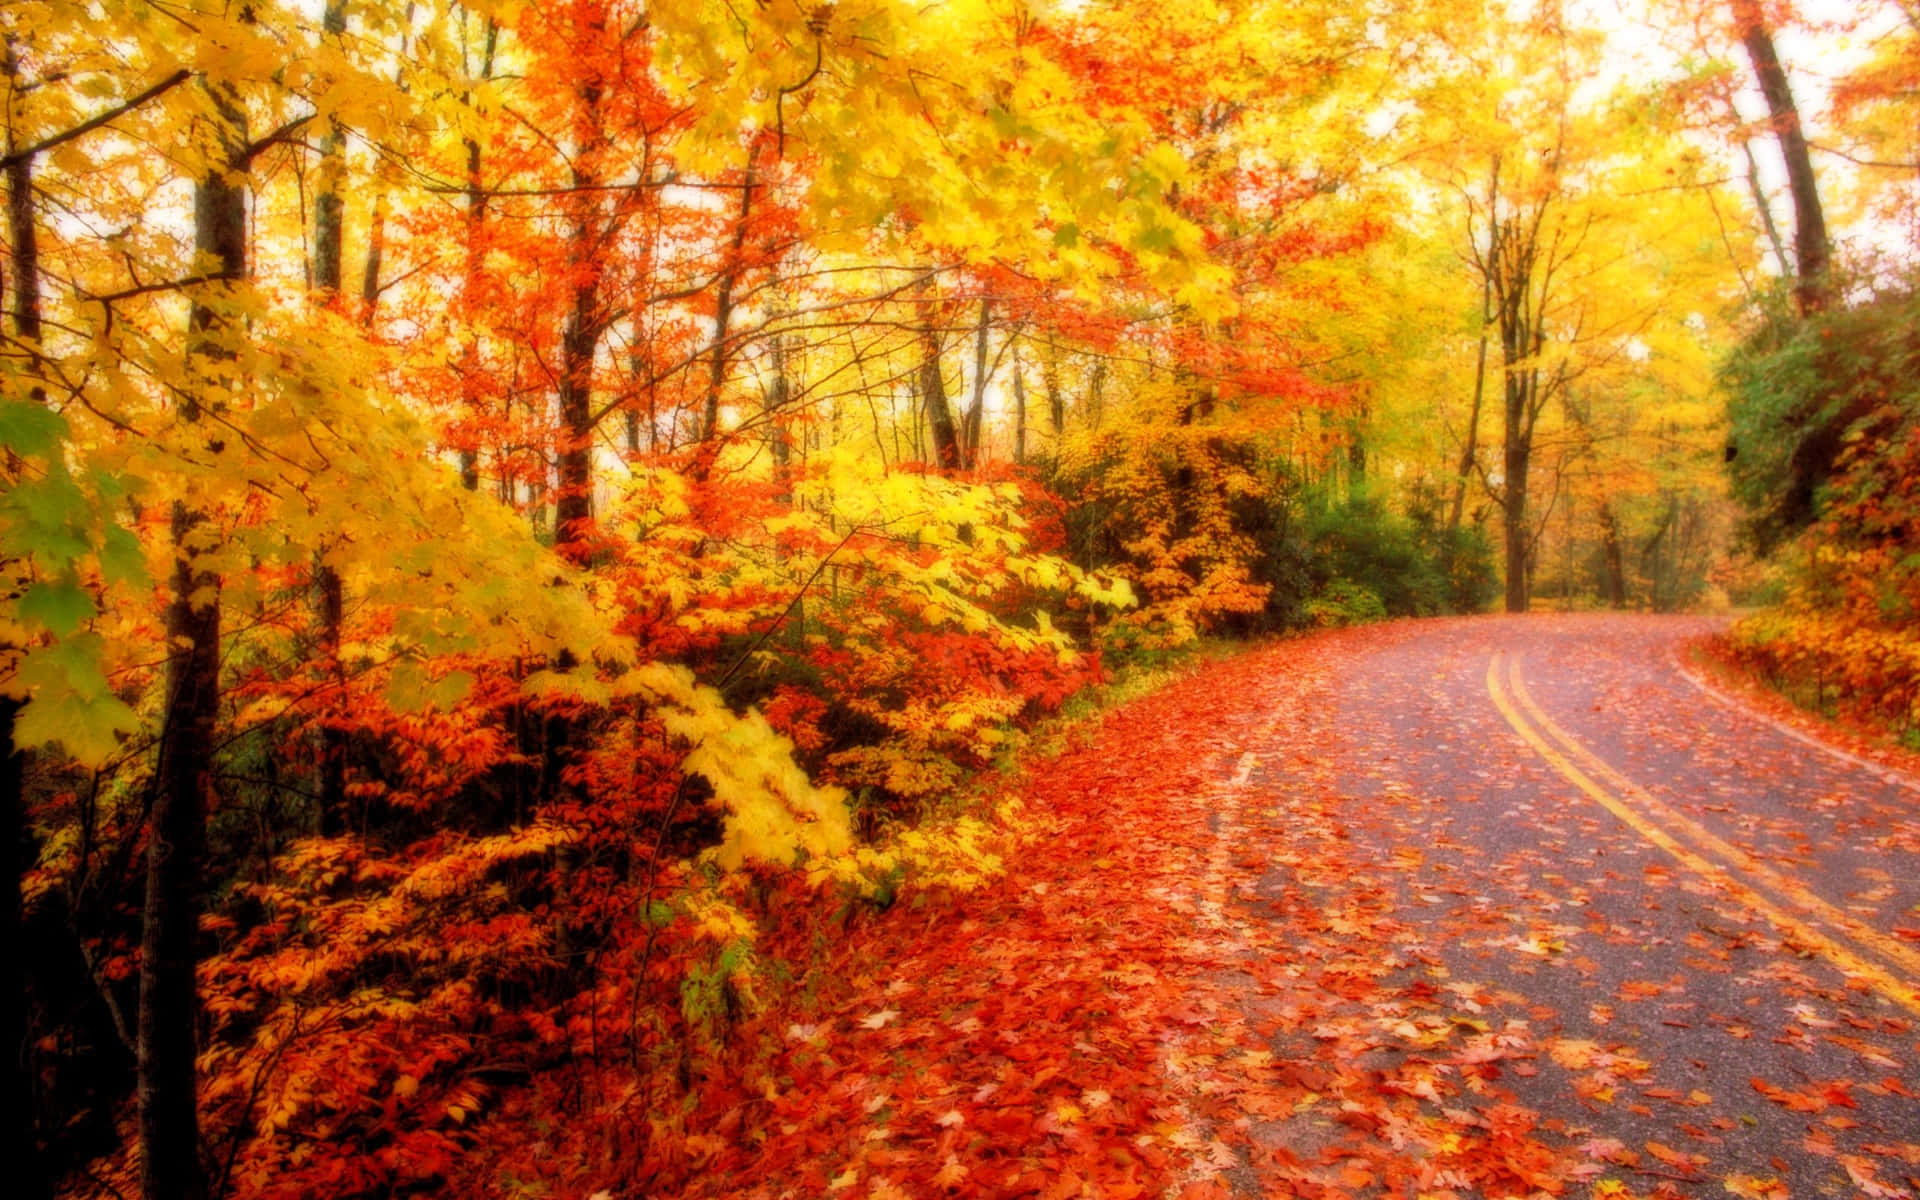 The Beauty Of Nature And Vibrant Colors Surround Us In The Fall - Enjoy The Moments And Be In Awe Of The Magic. Wallpaper